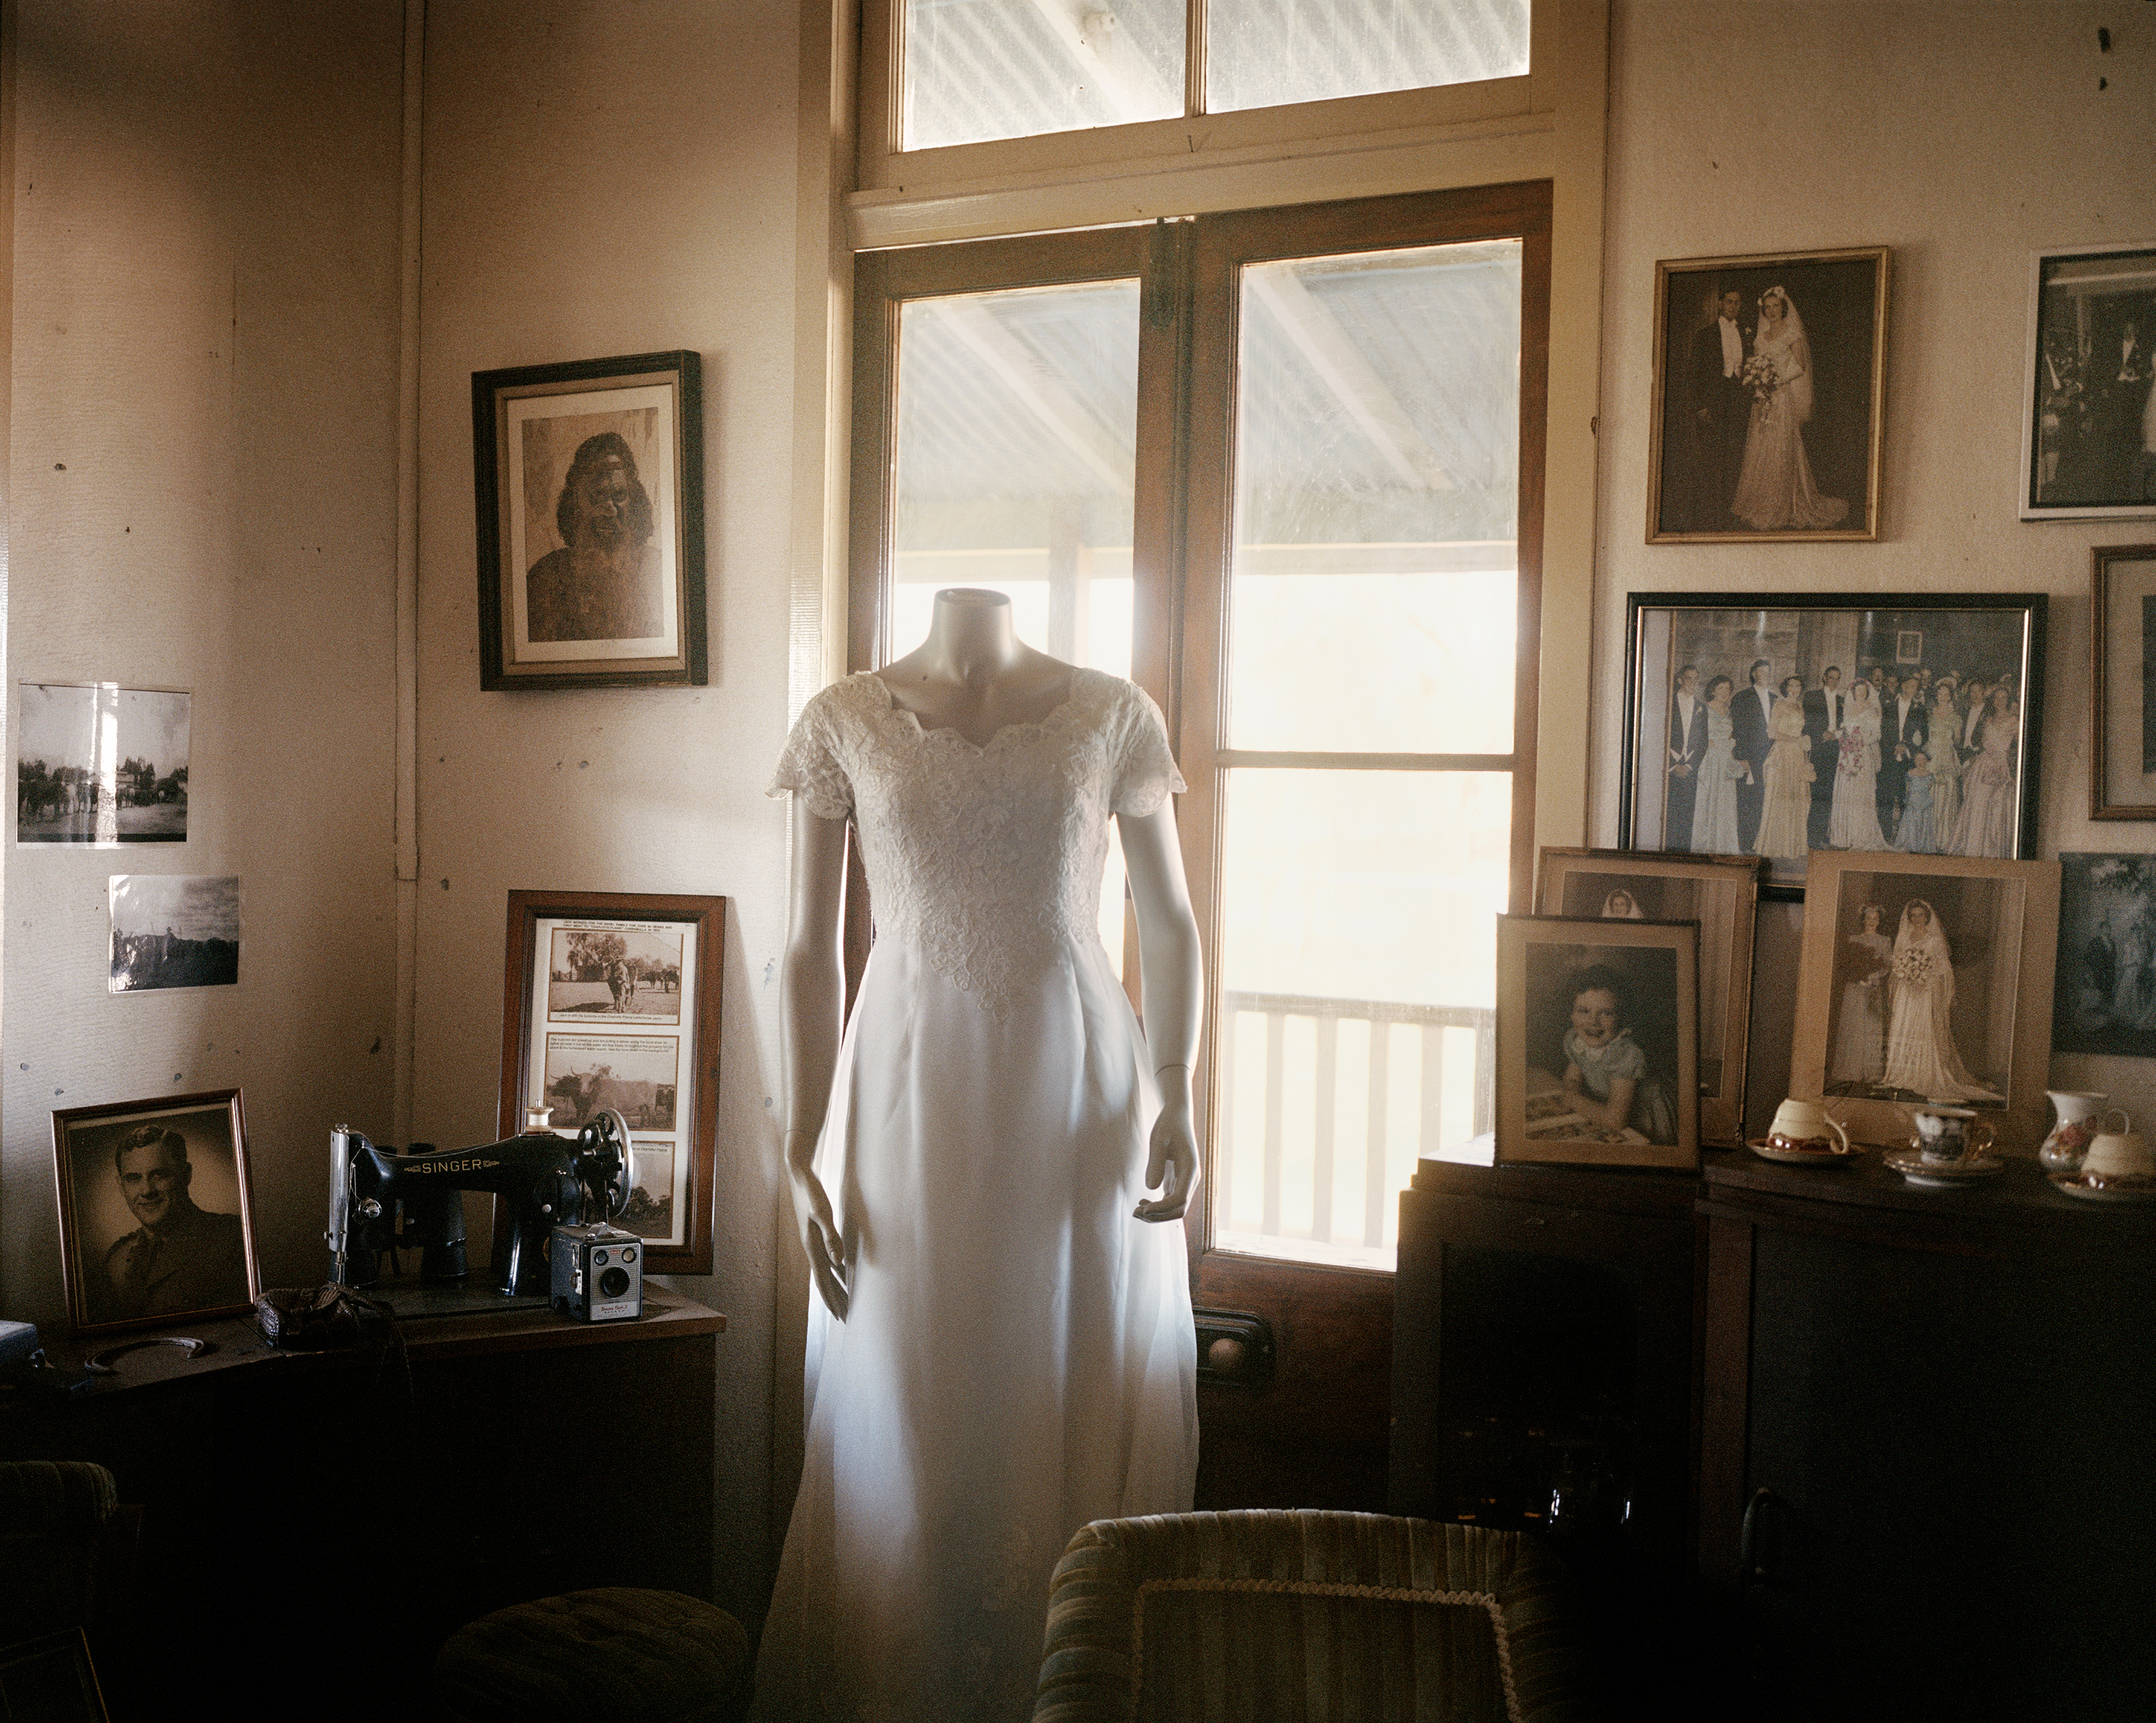 The wedding dress of Robyn Russell, 72, at her home on Charlotte Plains in Queensland in November. Russell lives and works her 69,000-acre property alone after her husband died of a brain tumor in 2011. Due to the drought, she describes herself "sliding into debt." In 2001 she had 8,000 sheep but she has since destocked to a current 3,800. To supplement her farm income, she has established a tourism business on her property with historical tours and farm stays. (Adam Ferguson for TIME)